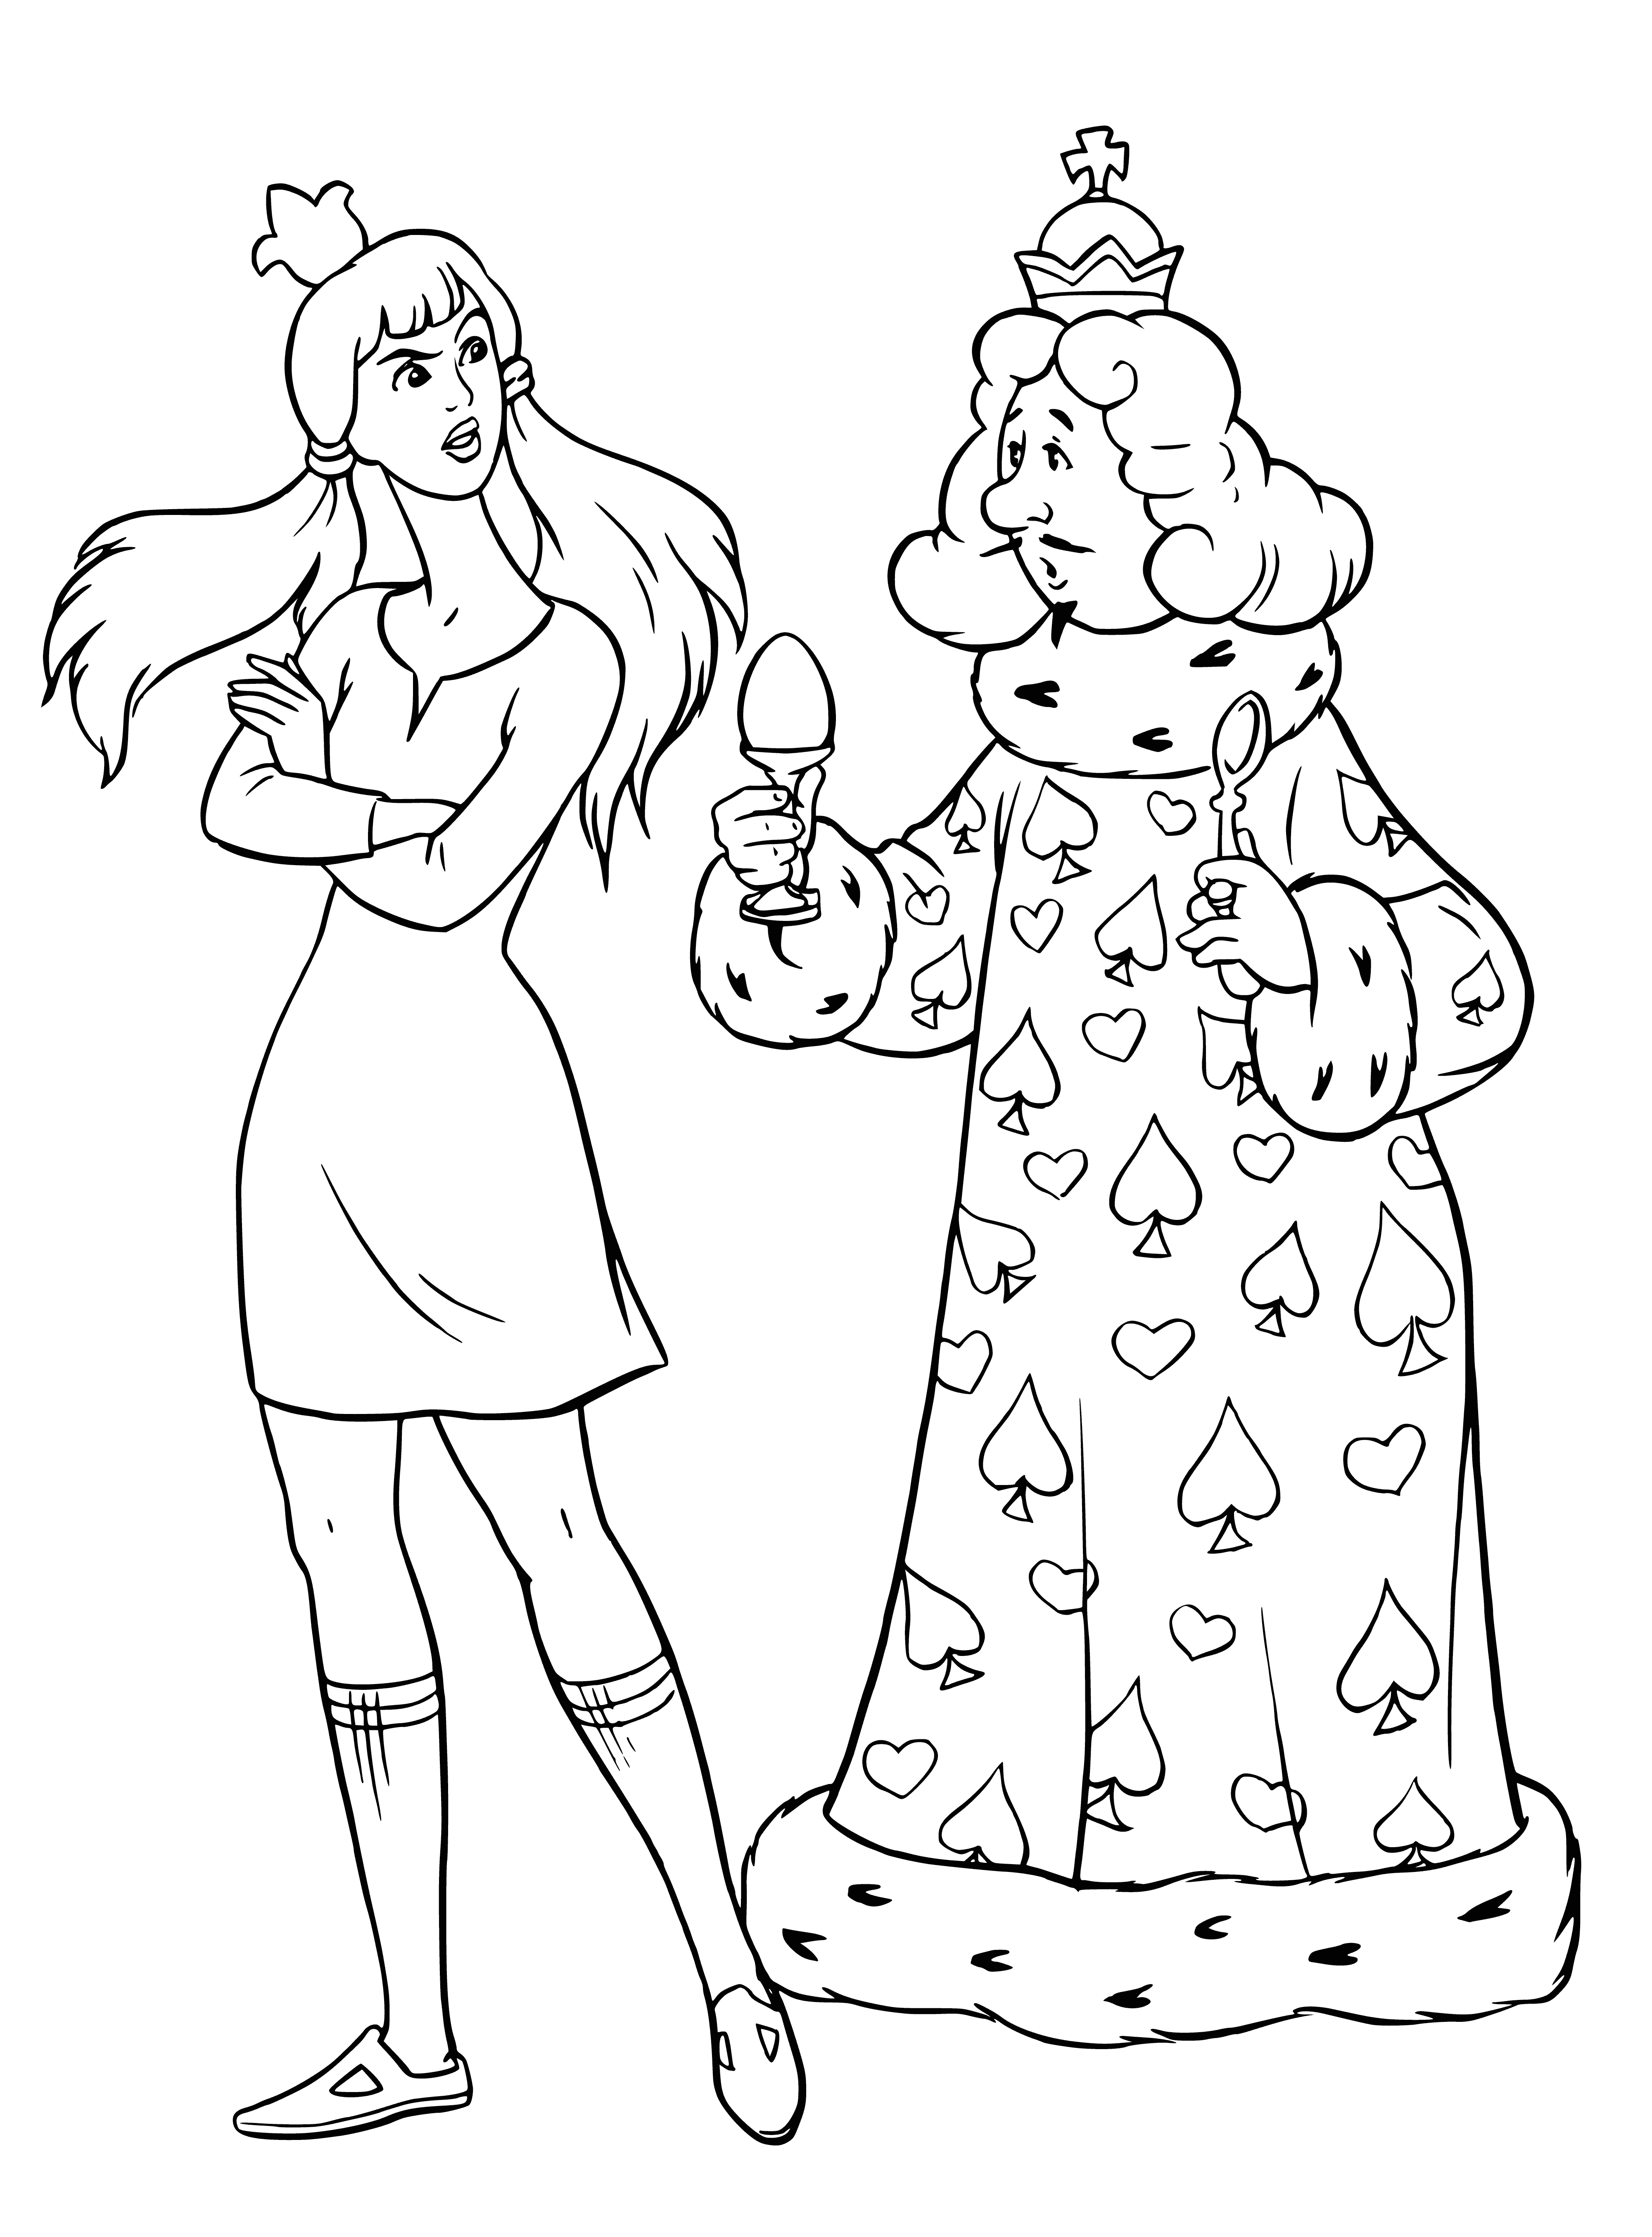 coloring page: King and princess enjoying music from a group of musicians; both are content and happy.